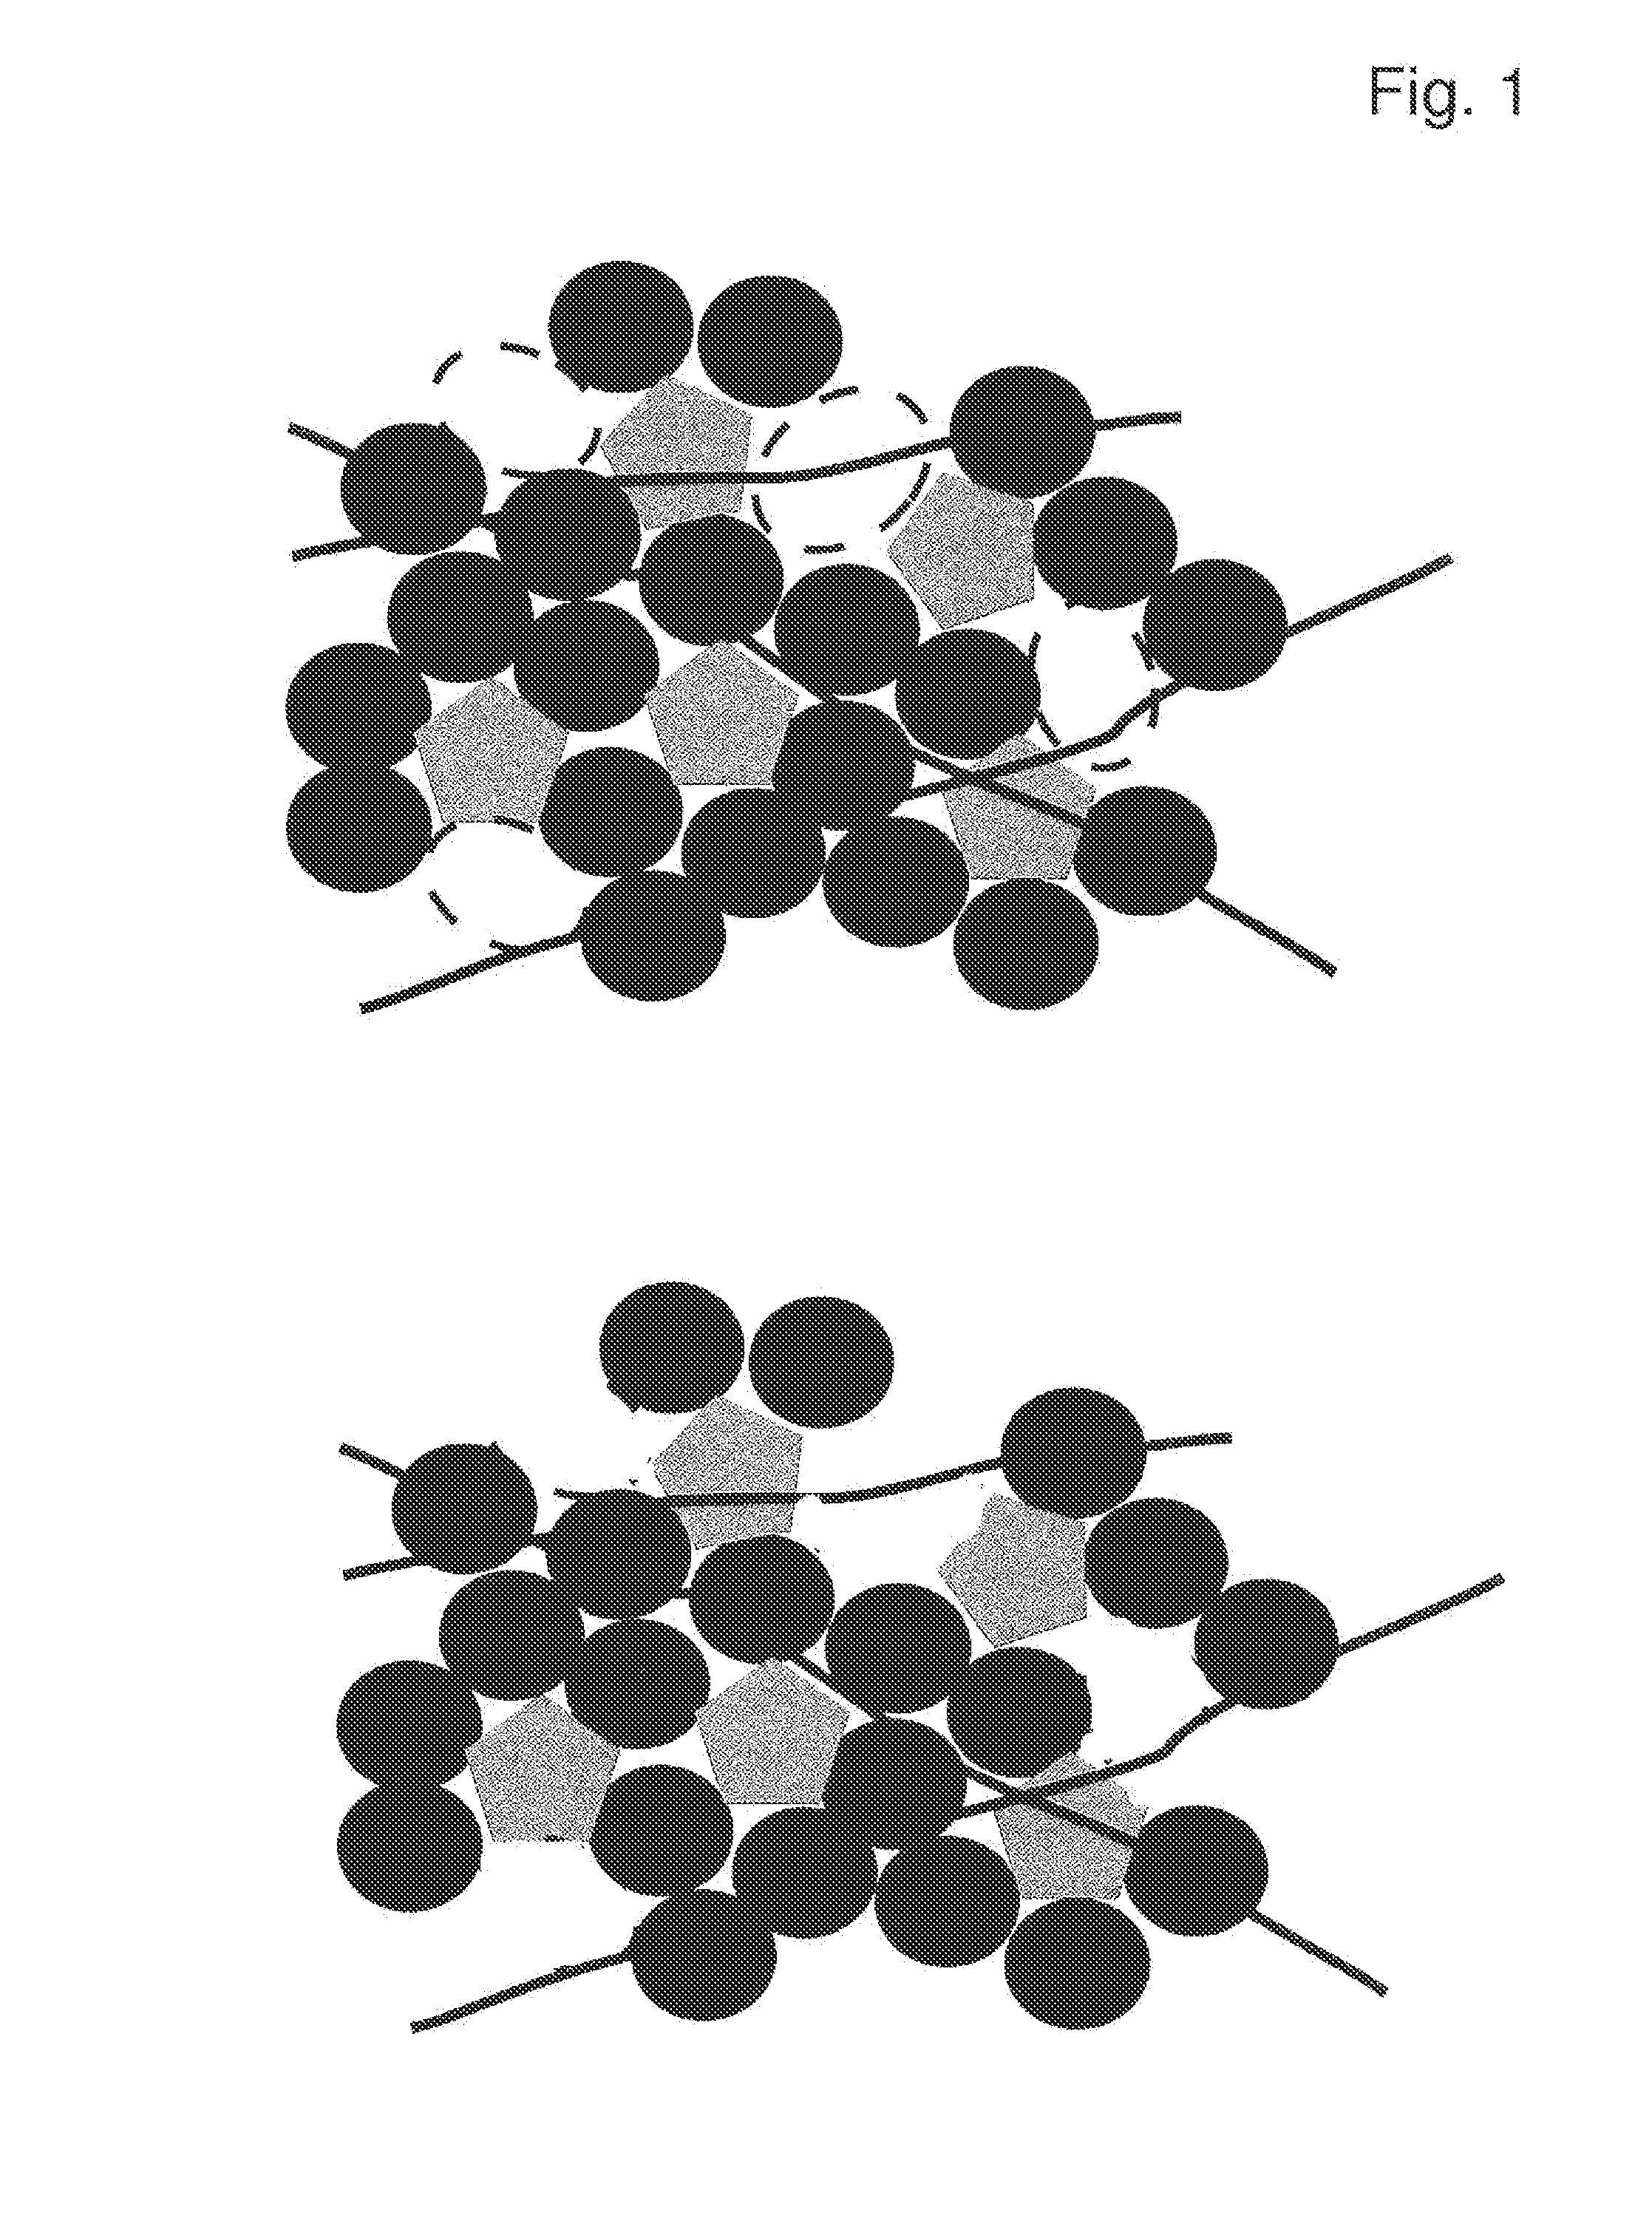 Electrically conductive nanocomposite material comprising sacrificial nanoparticles and open porous nanocomposites produced thereof